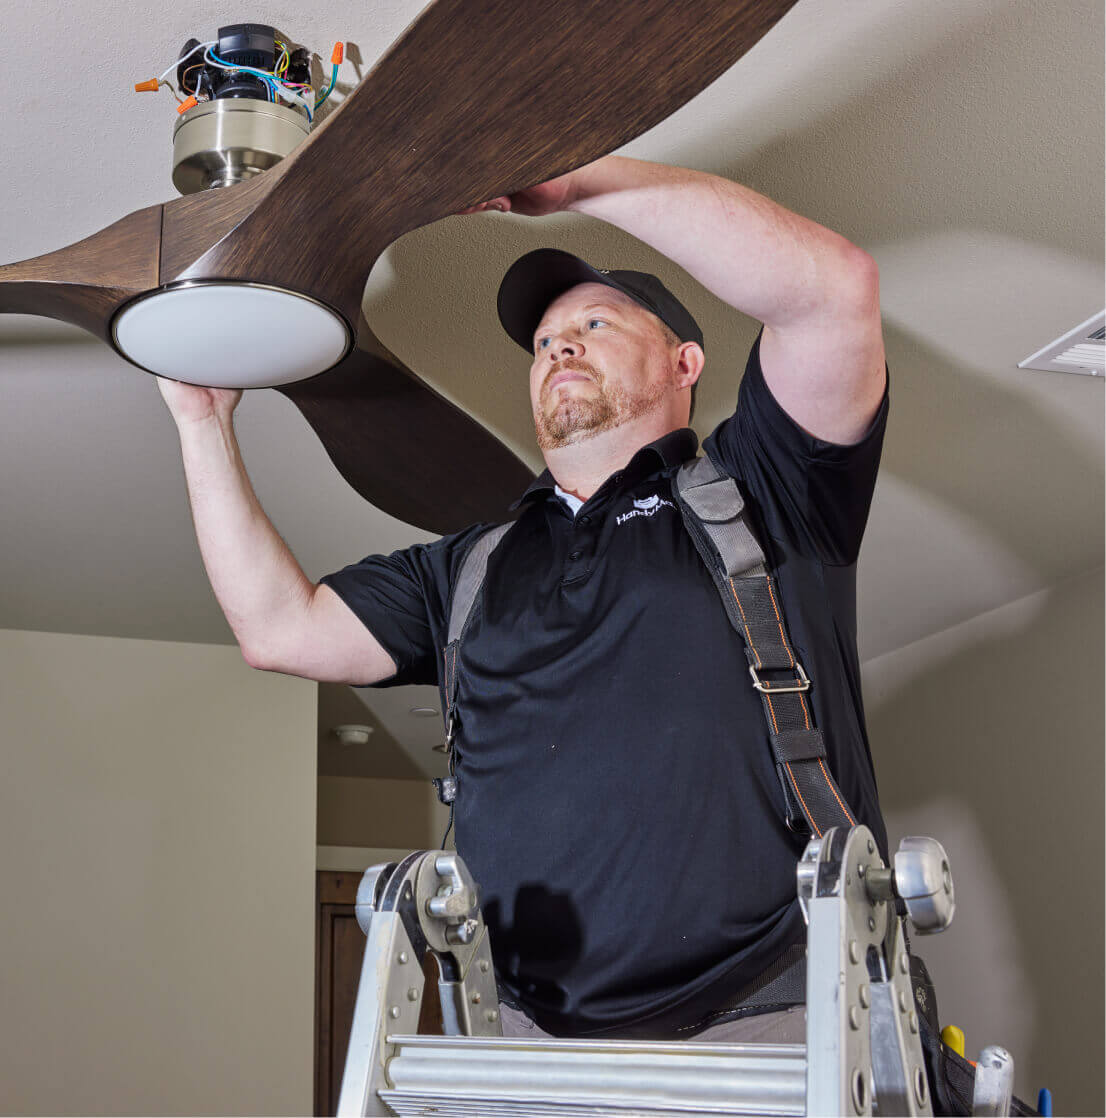 Tailored, easy and affordable insurance for handyman business in Tennessee